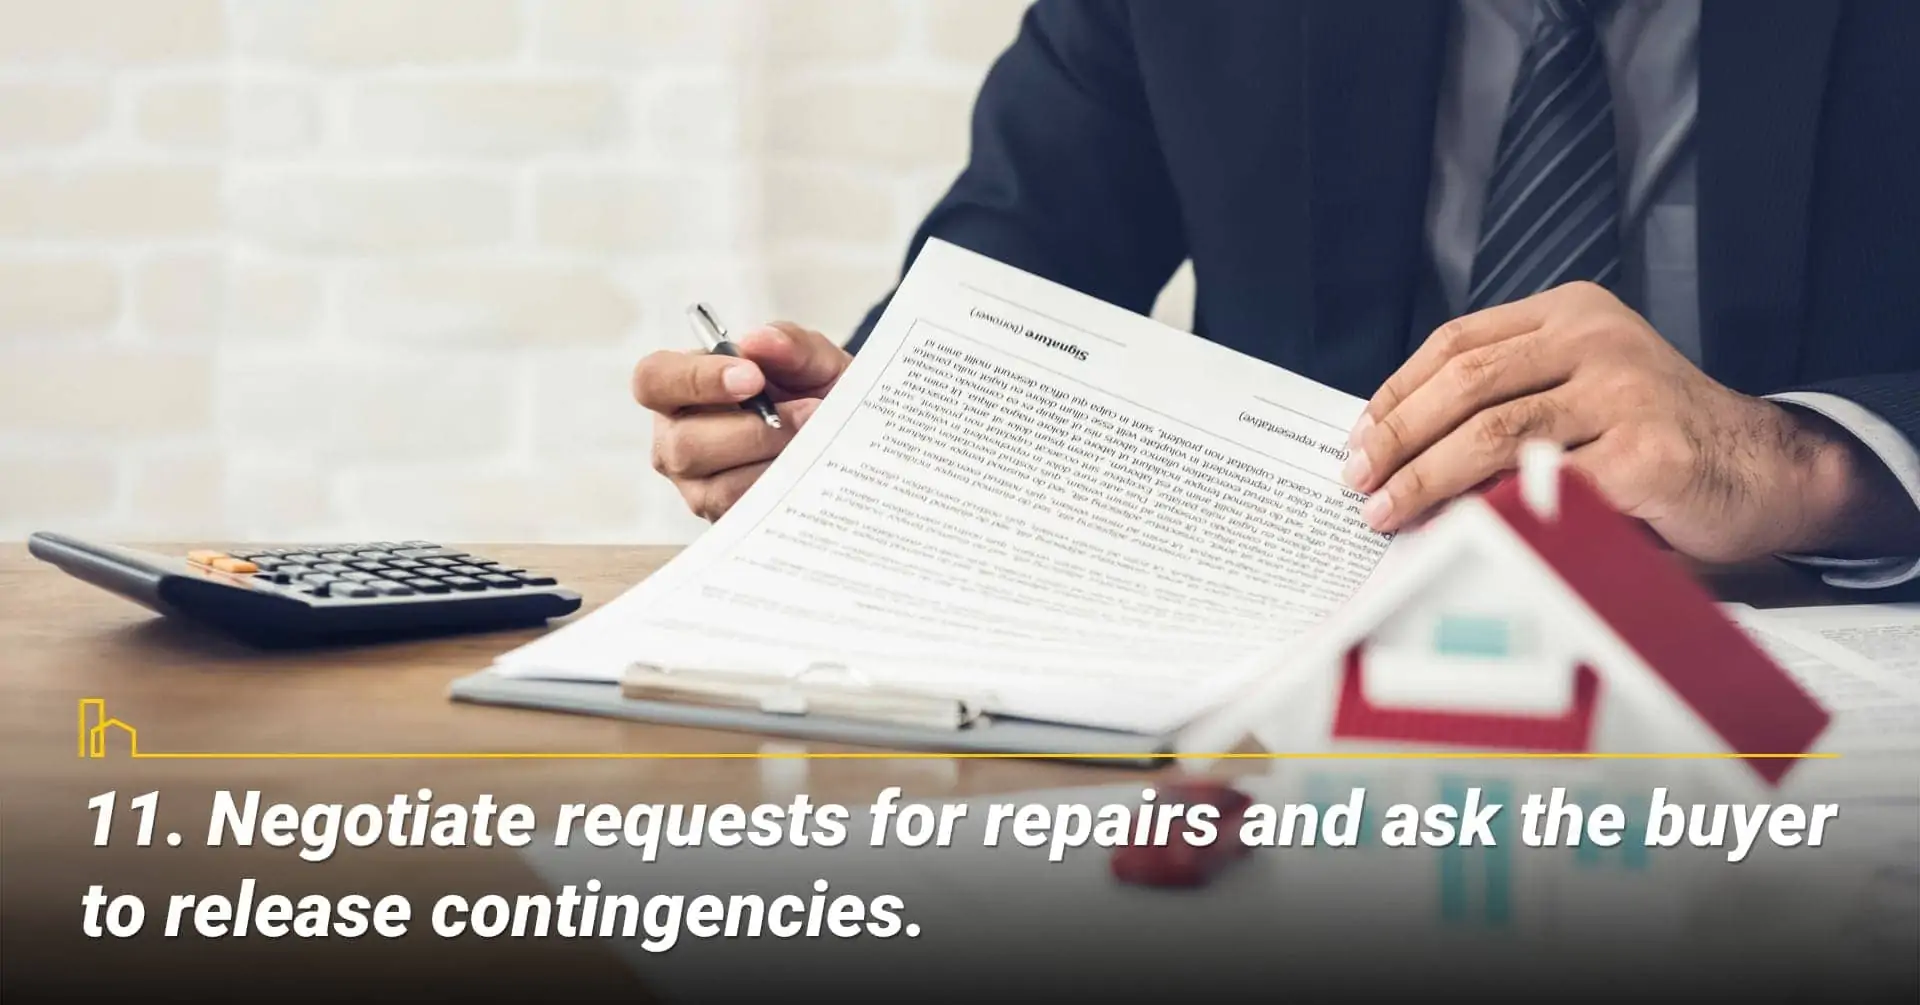 Negotiate requests for repairs and ask the buyer to release contingencies, negotiate requests from buyer